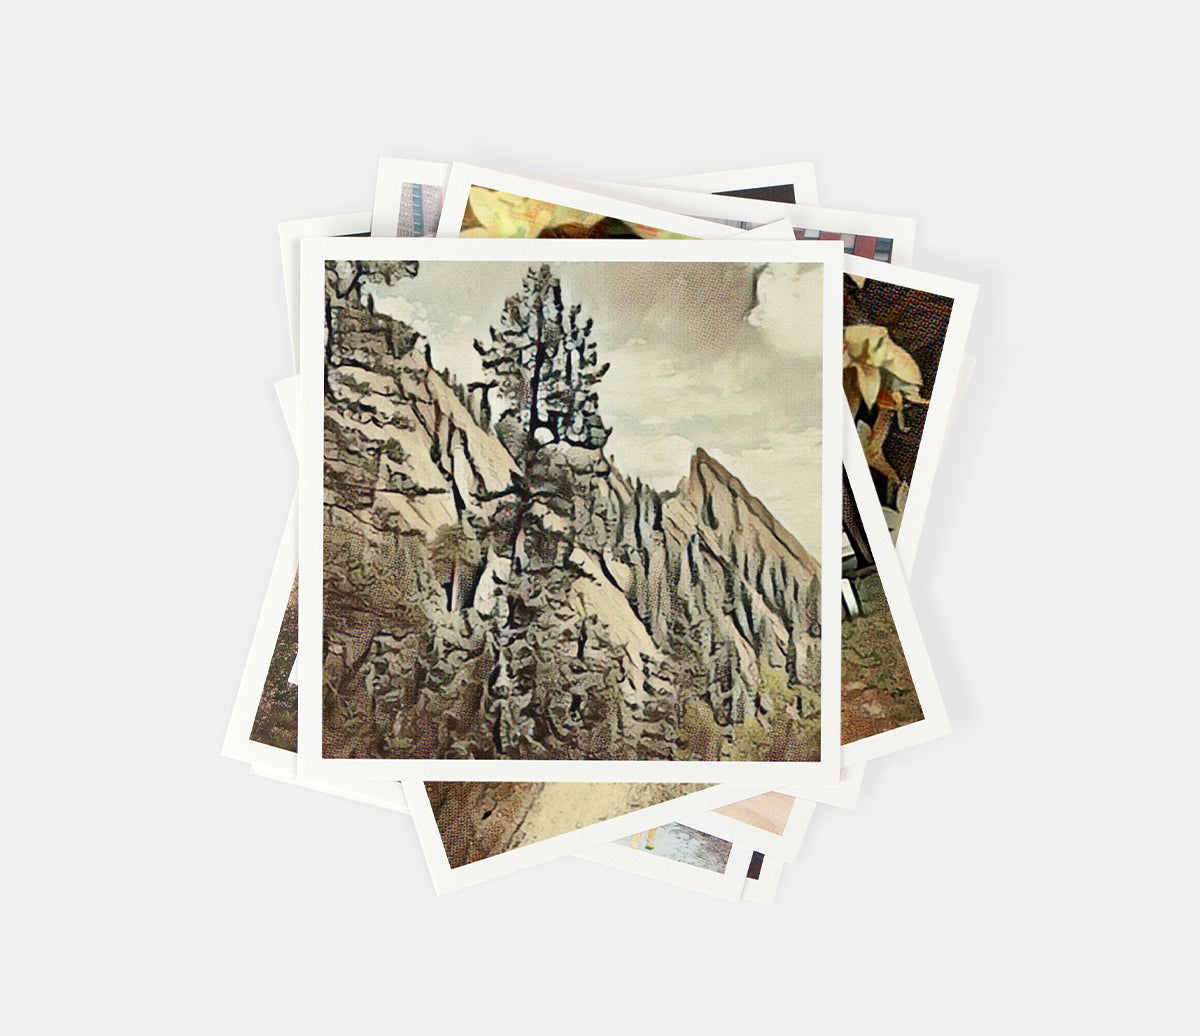 Photo print set created with photos rendered as drawings